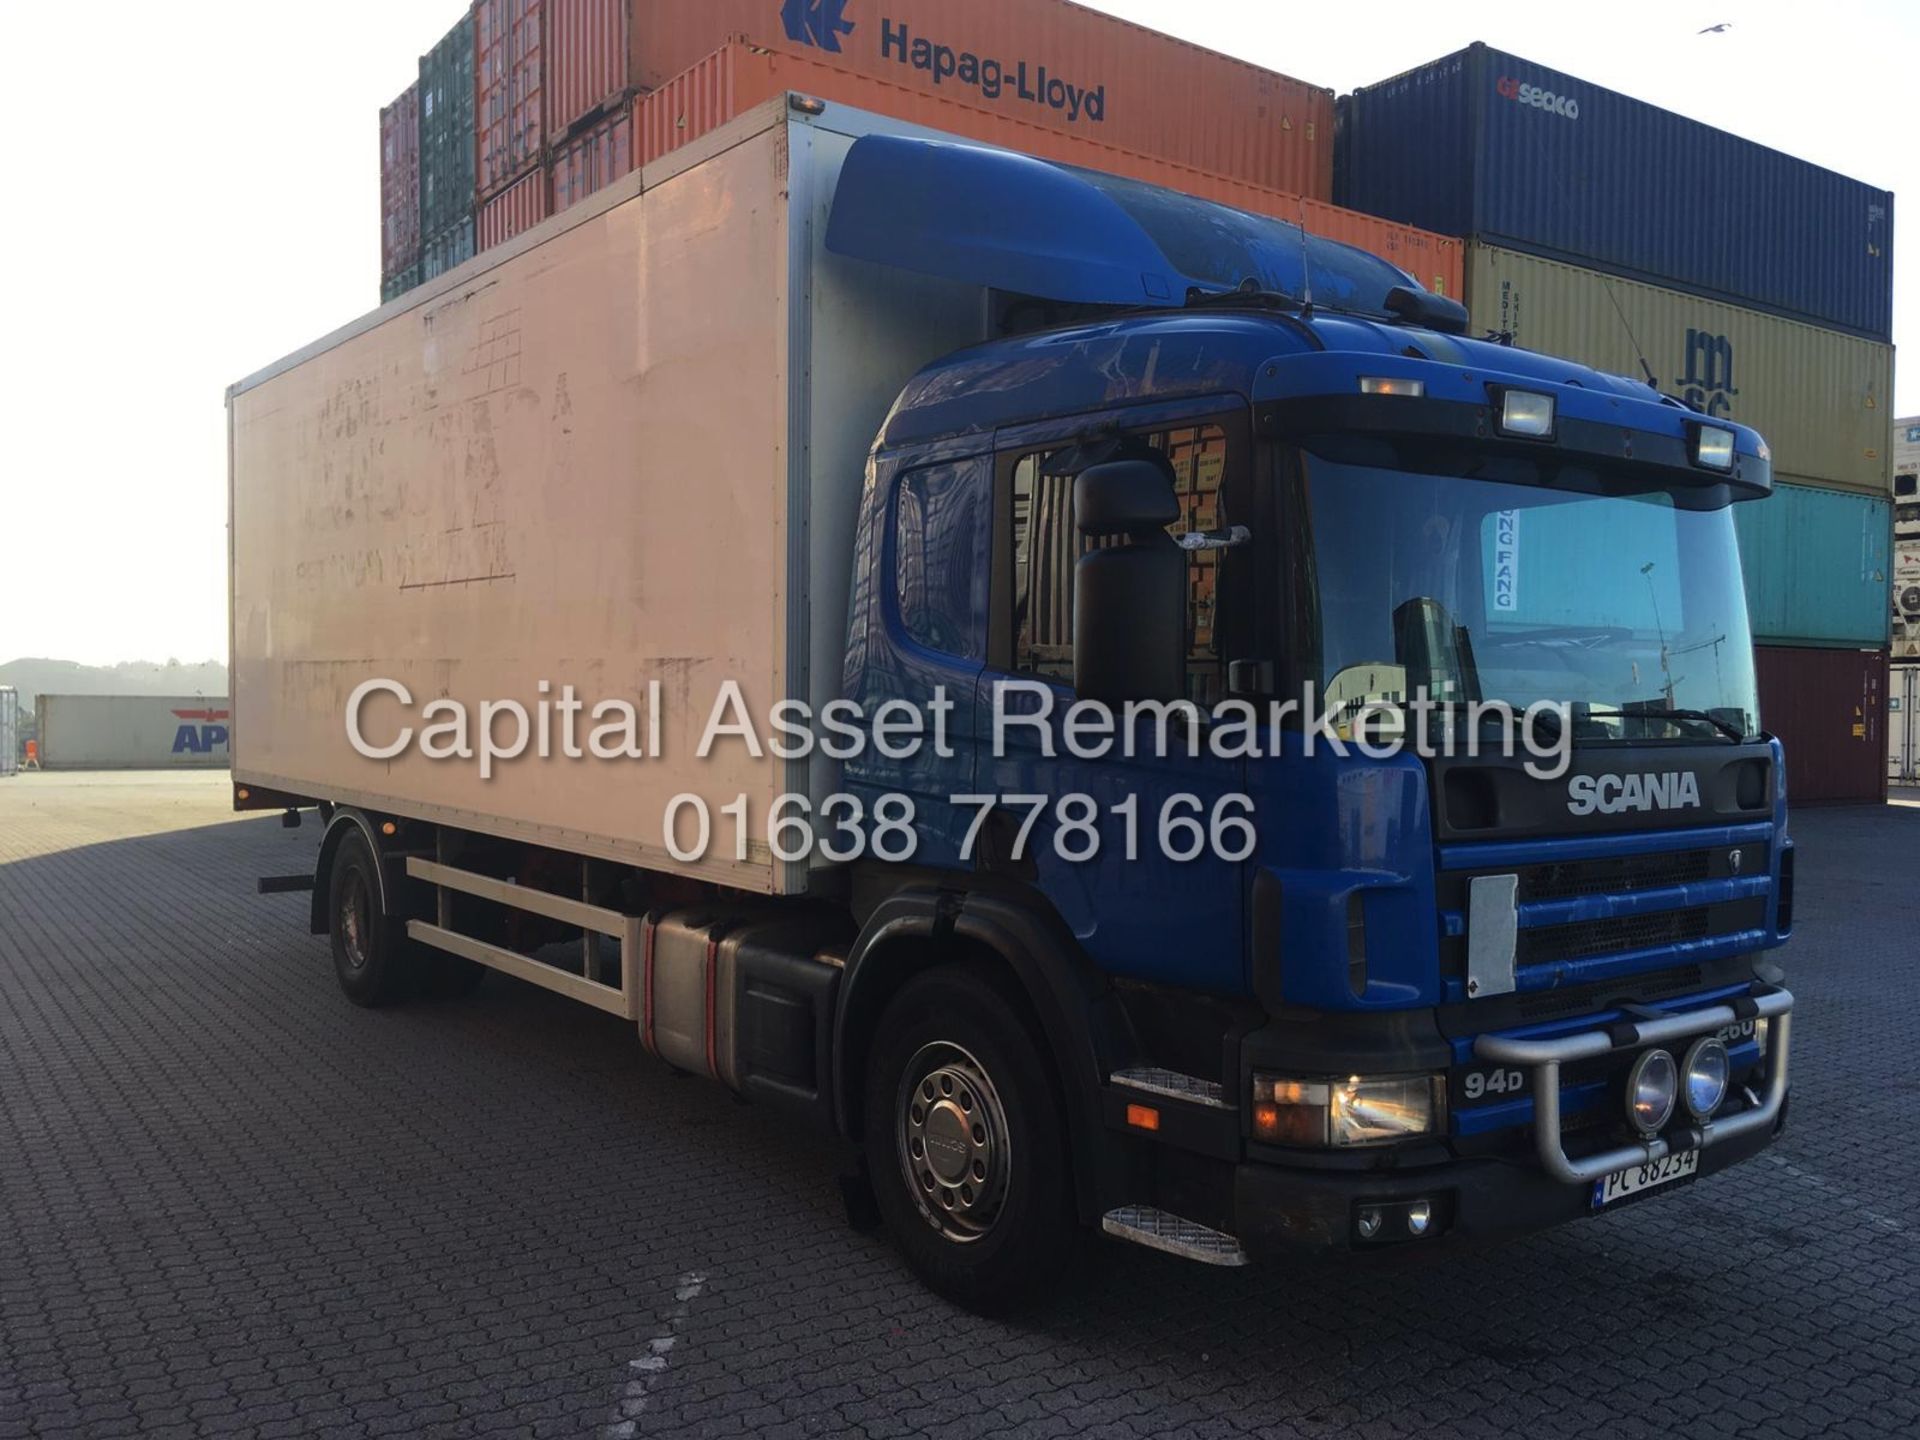 SCANIA P94D "260BHP" SLEEPER CAB (1999 YEAR) LEFT HAND DRIVE / LHD - 24FT 6" BOX BODY - SIDE ACCESS - Image 3 of 13